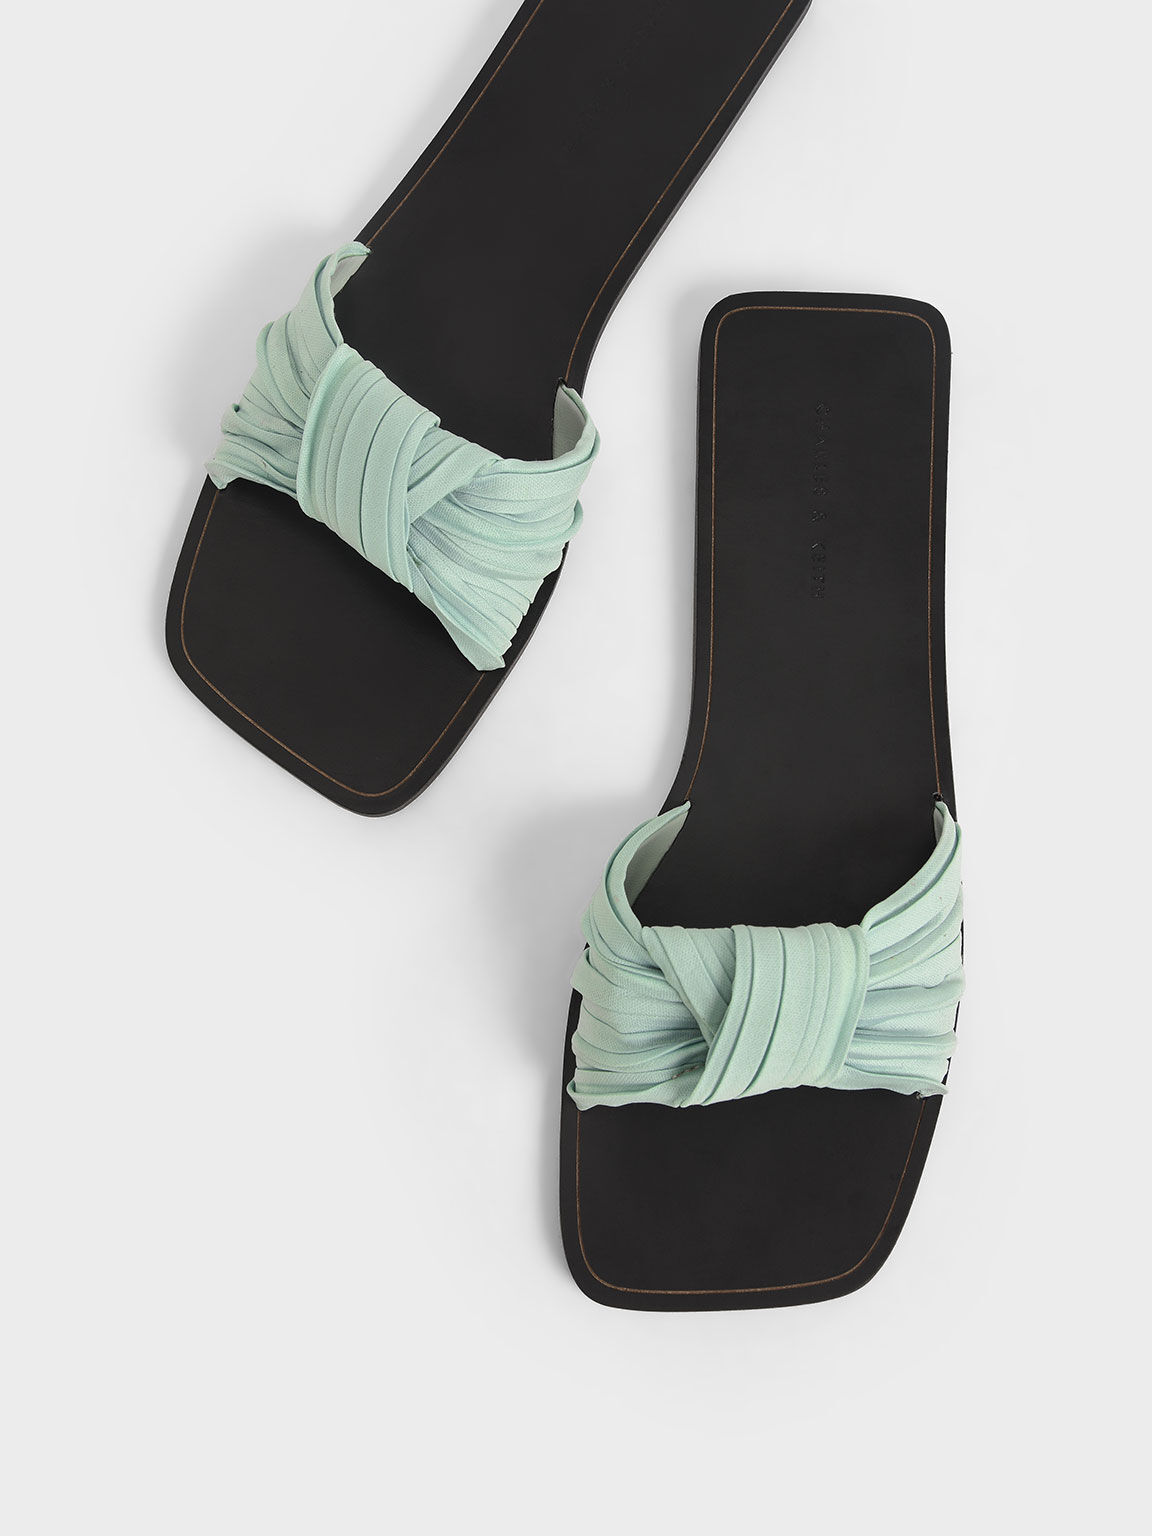 Pleated Fabric Knotted Slide Sandals, Mint Green, hi-res